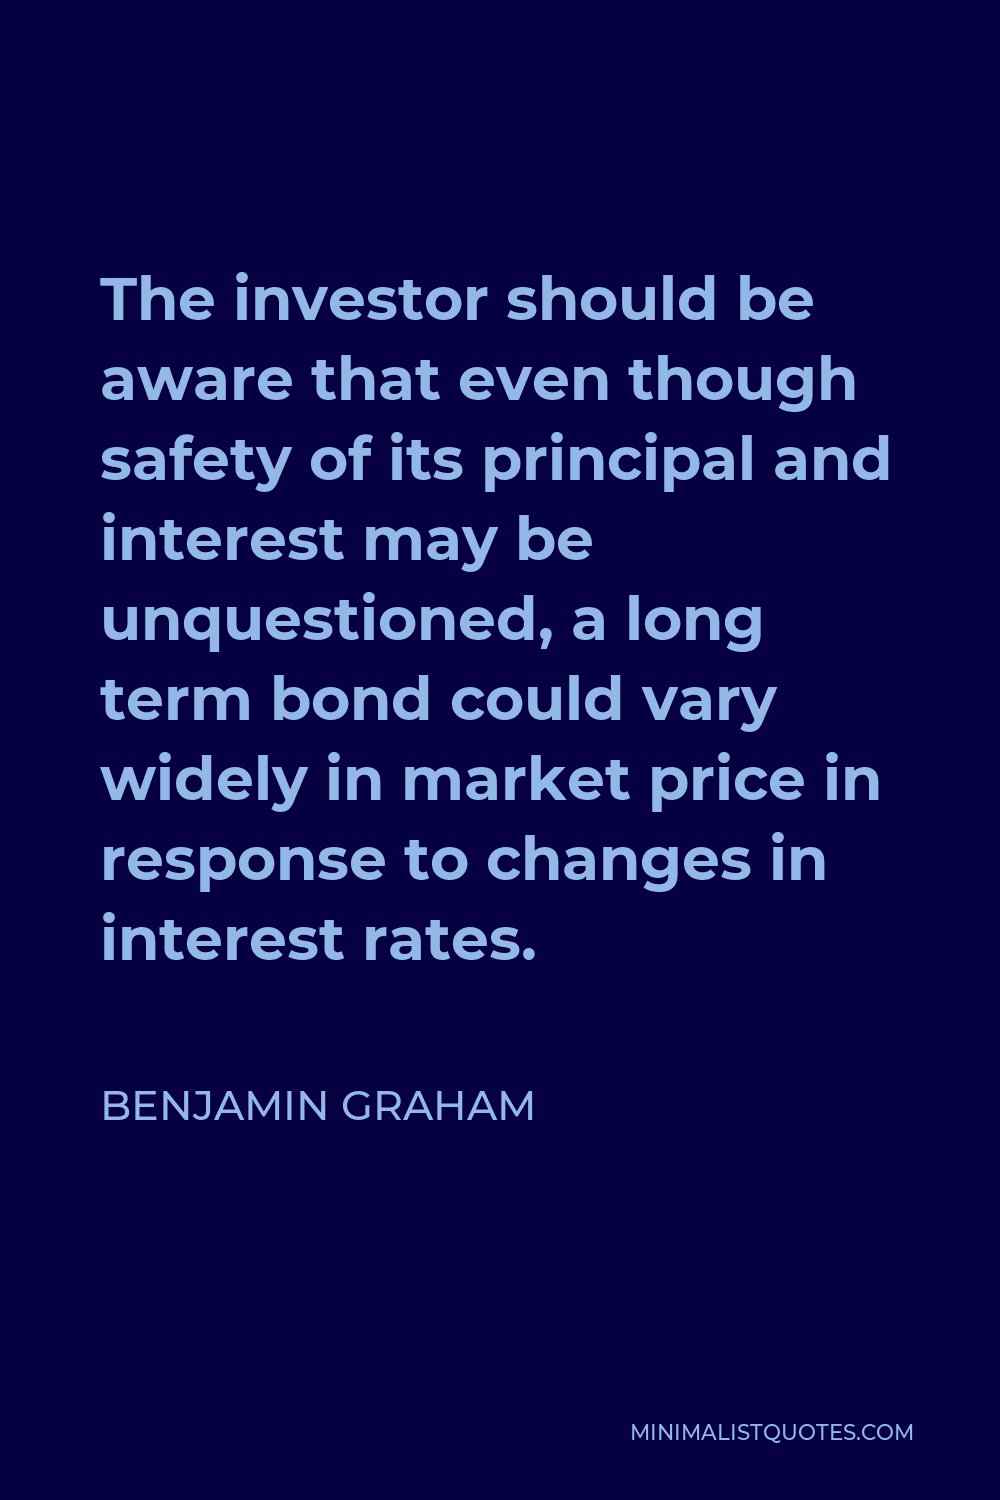 Benjamin Graham Quote - The investor should be aware that even though safety of its principal and interest may be unquestioned, a long term bond could vary widely in market price in response to changes in interest rates.